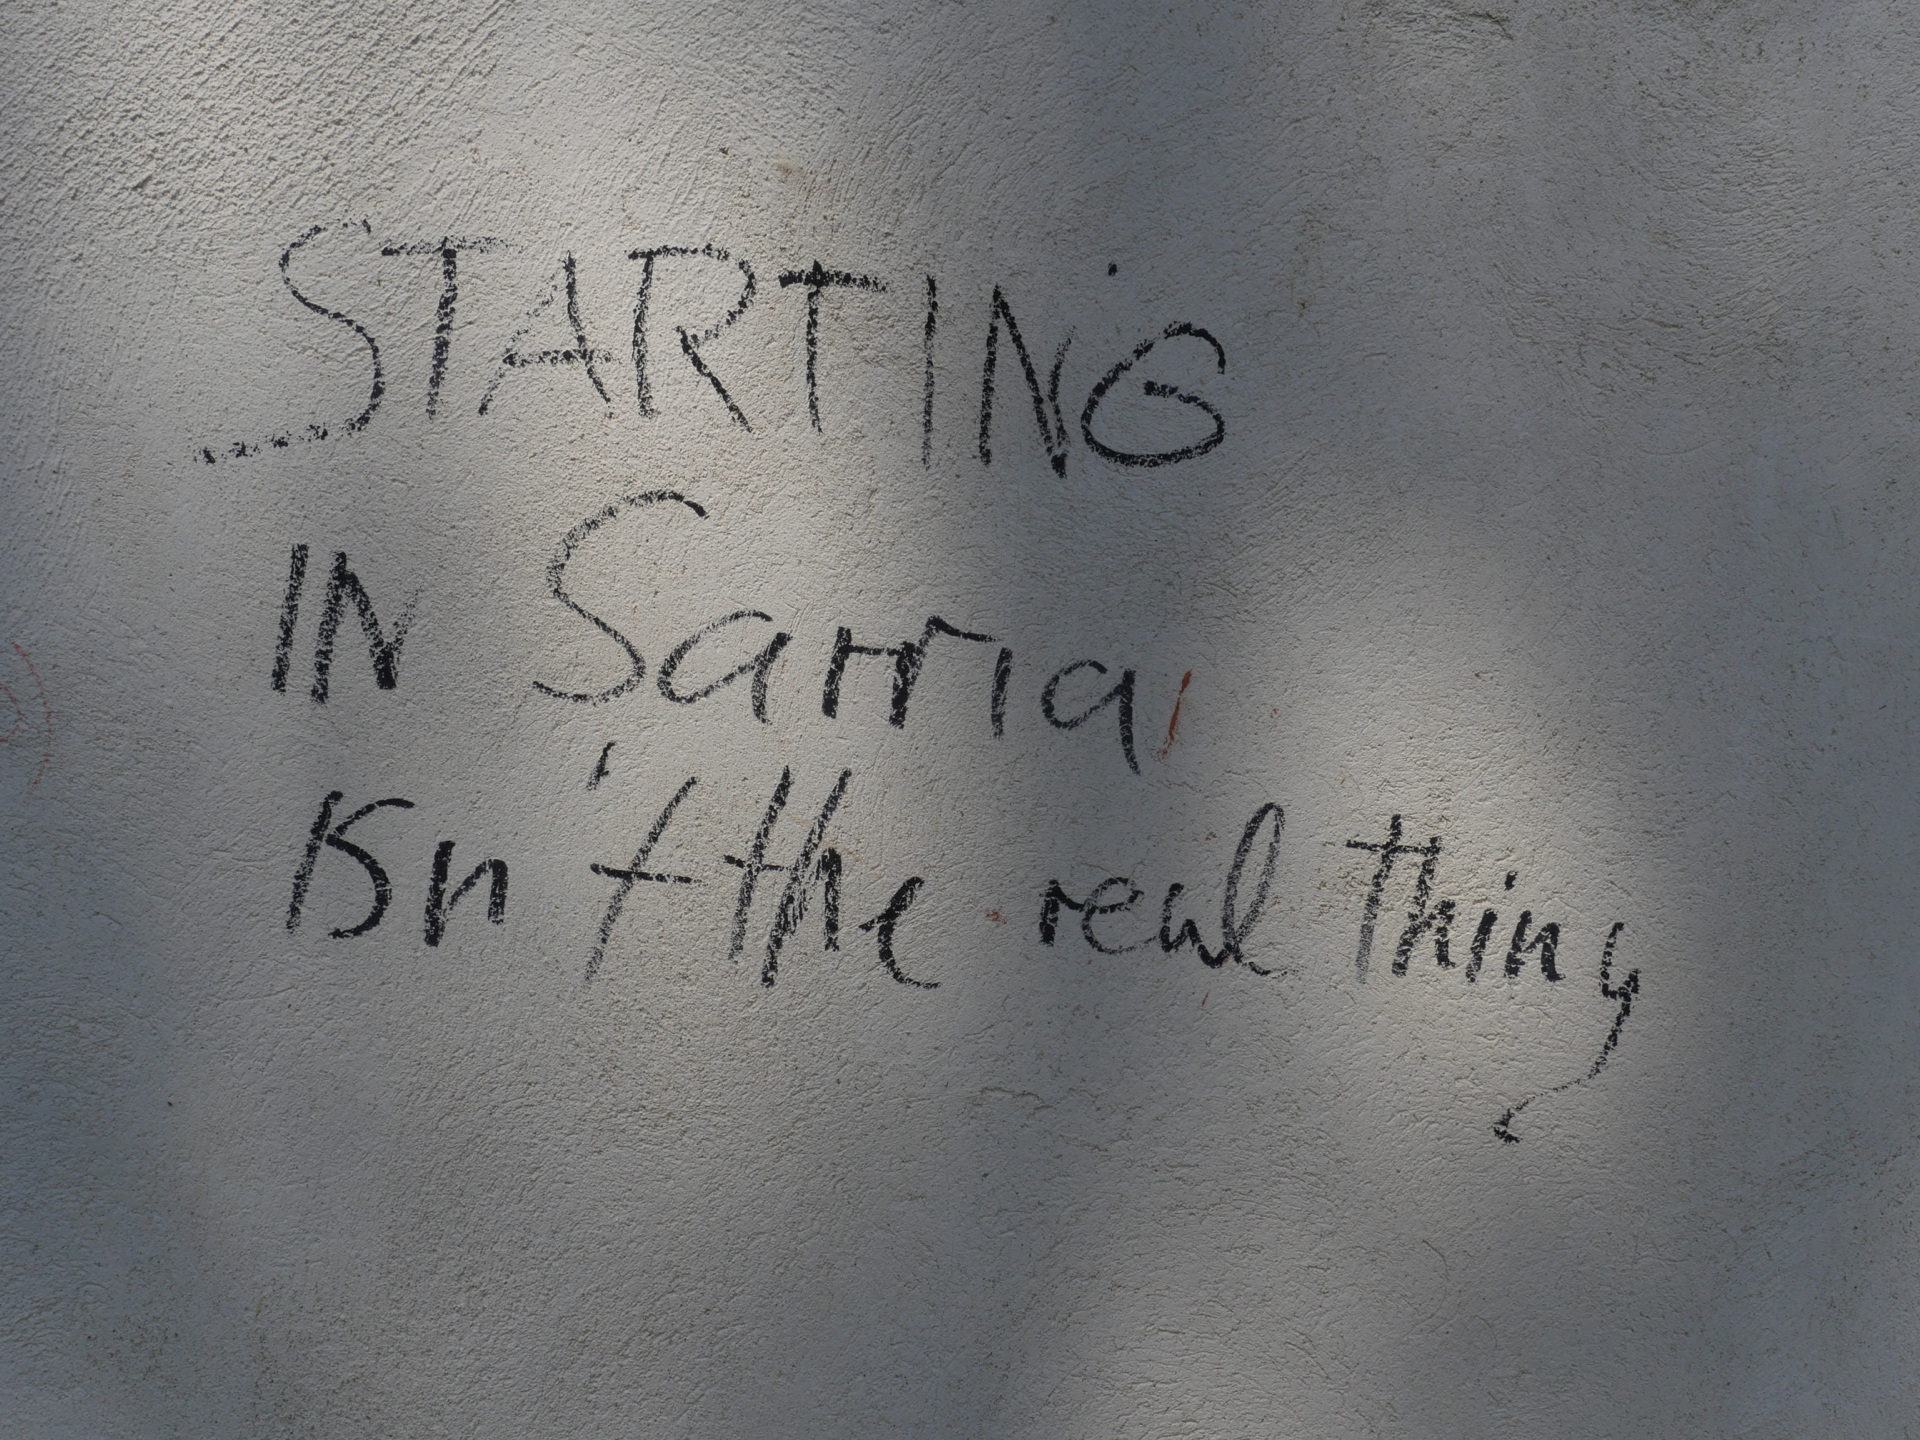 A handwritten sign near Sarria states, "Starting in Sarria isn't the real thing."